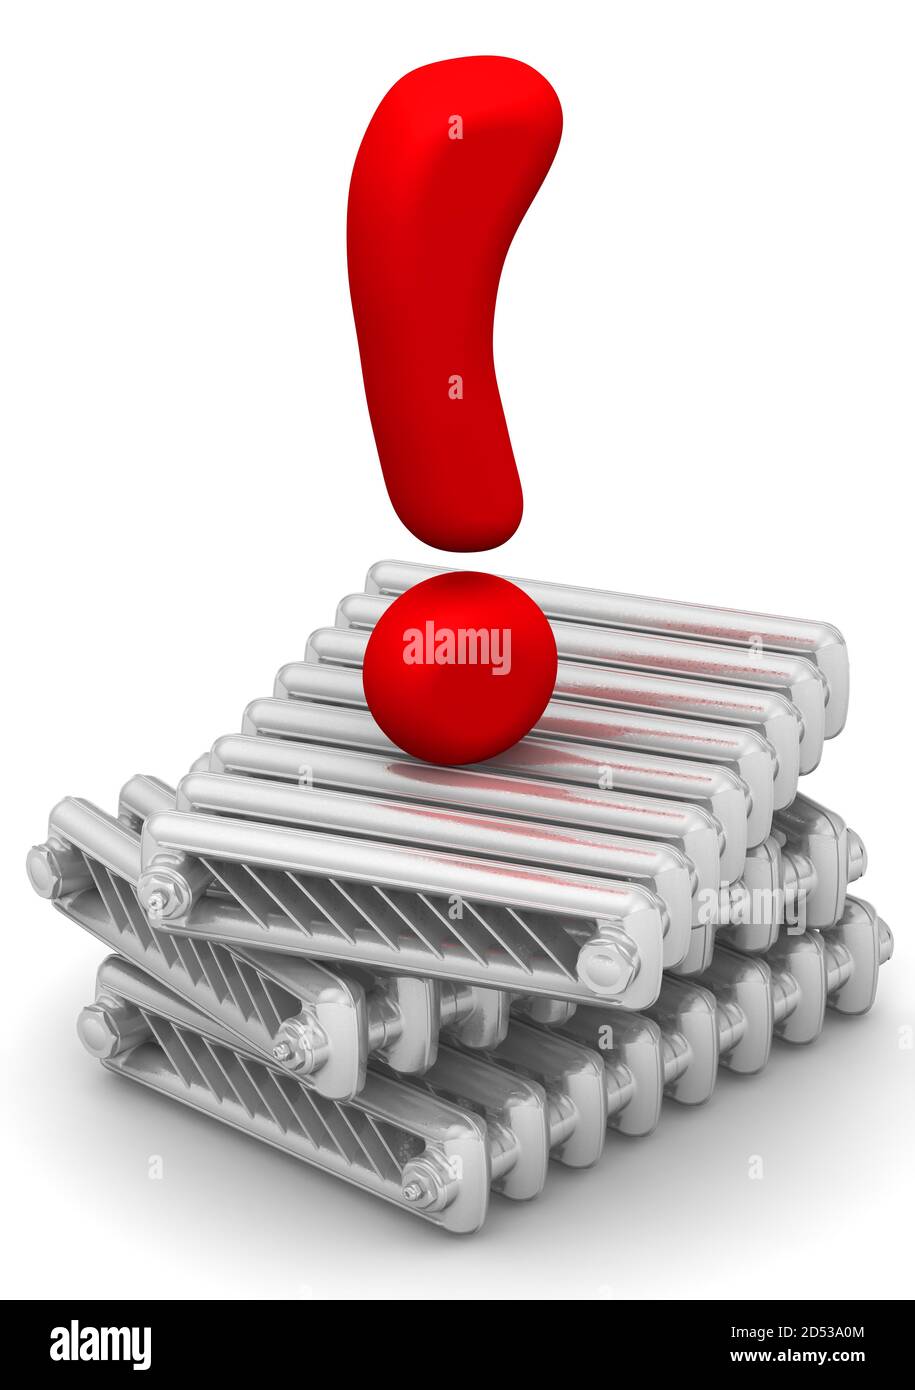 Important information on radiators. Stacked sections of cast iron heating radiators and one red exclamation mark on a white surface. 3D illustration Stock Photo